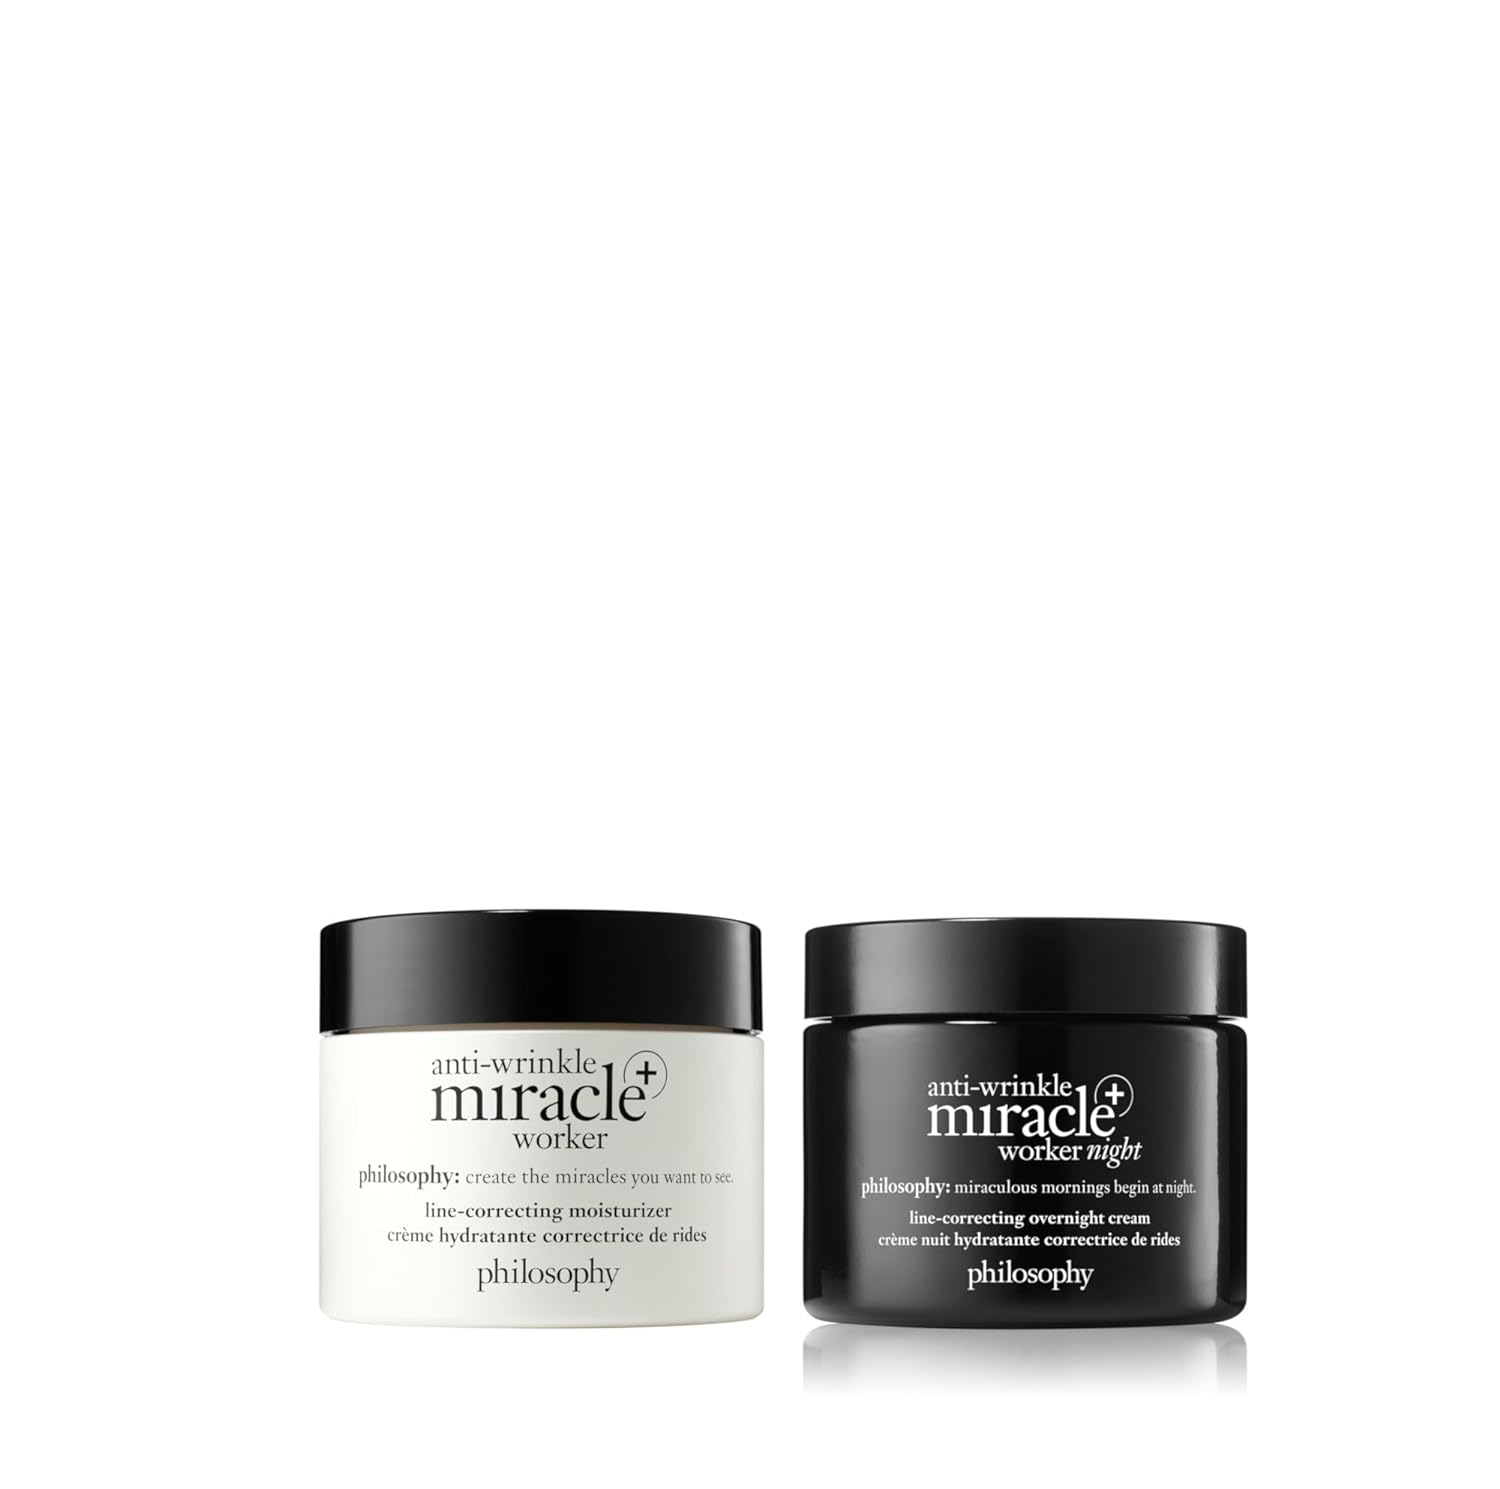 philosophy anti-wrinkle miracle worker moisturize day & night cream